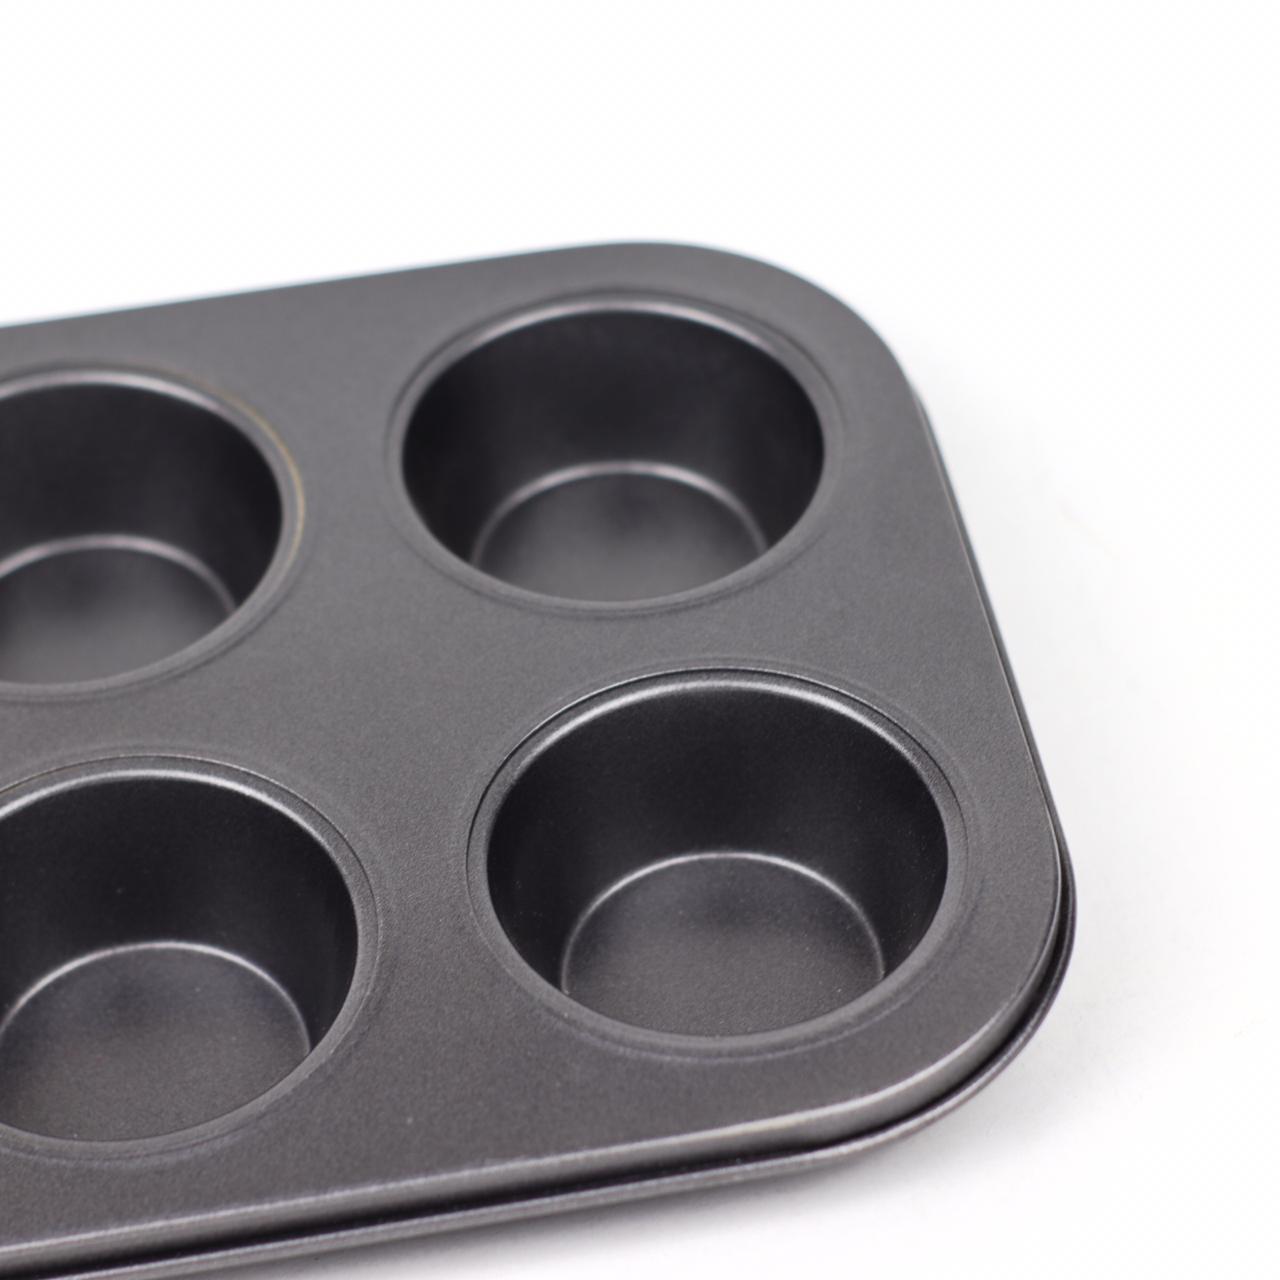 The Muffin Pan (6 Holed) - waseeh.com